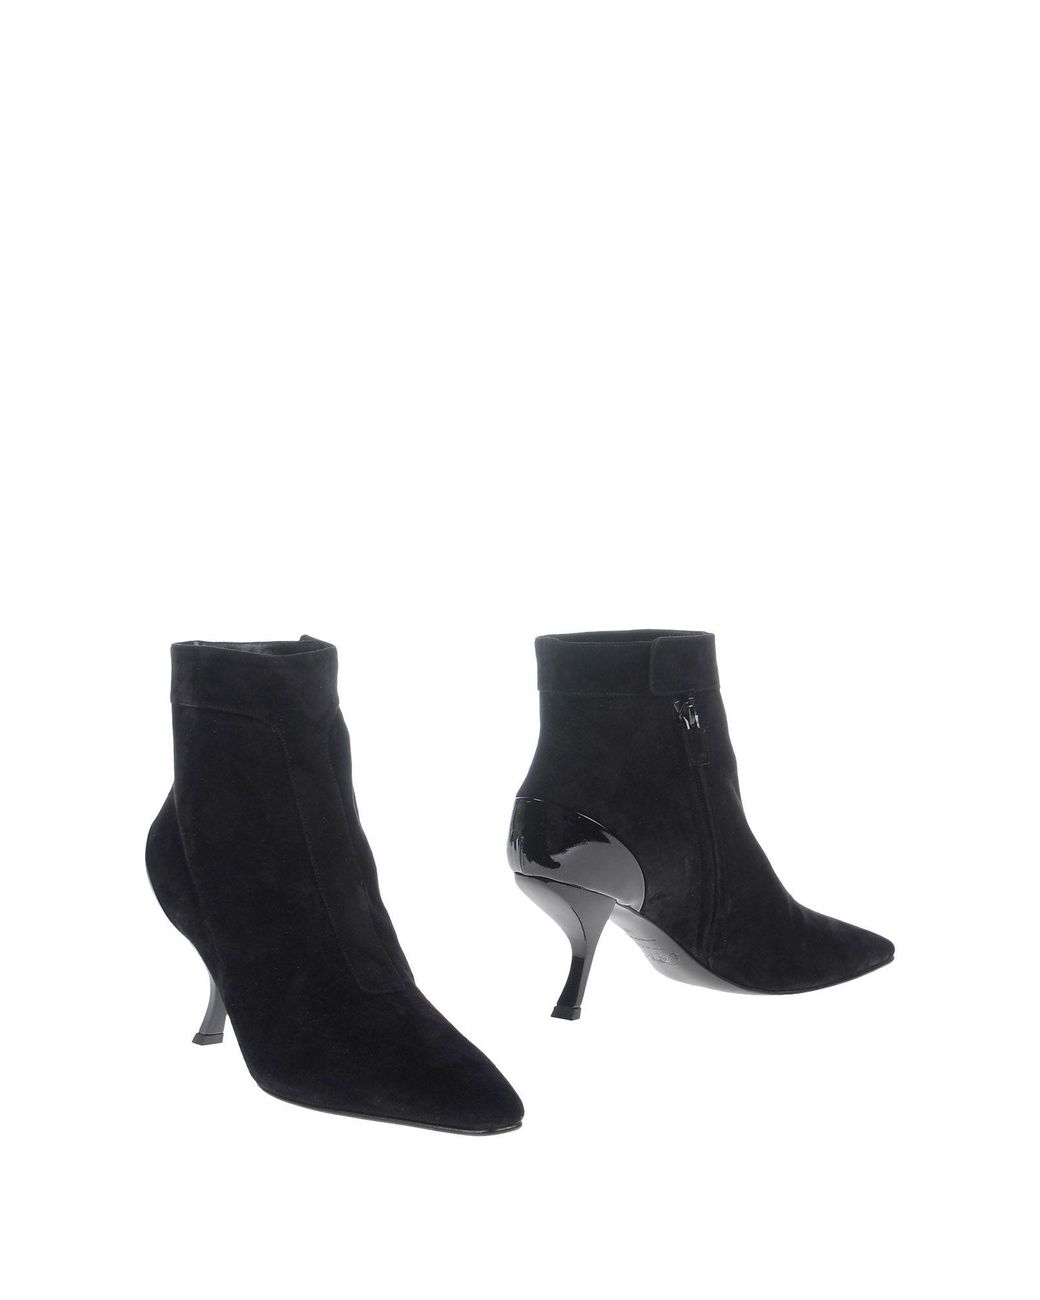 Roger Vivier Leather Ankle Boots in Black - Lyst